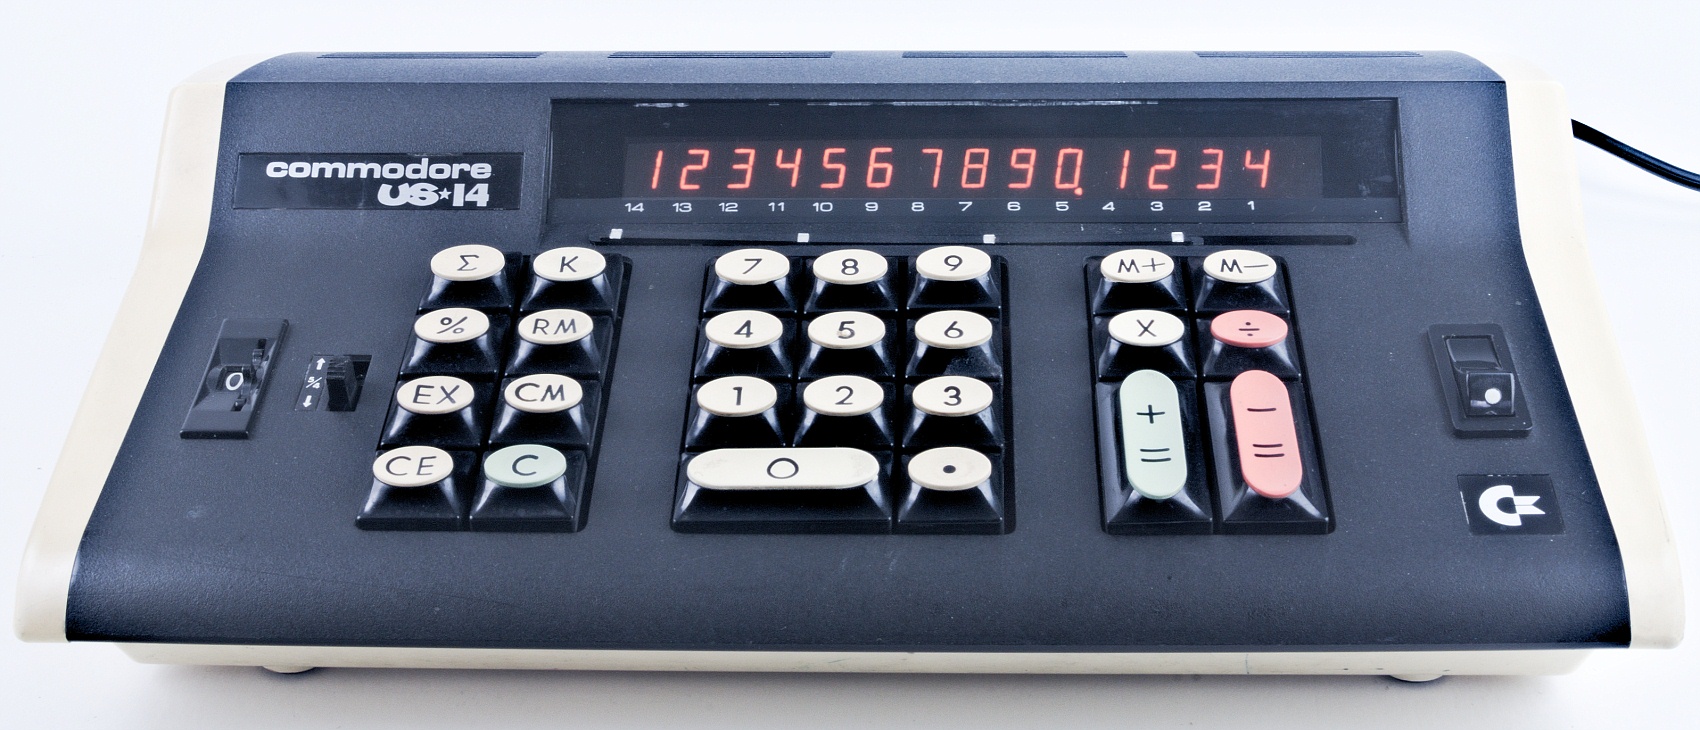 COMMODORE US*14 Electronic Business Calculator